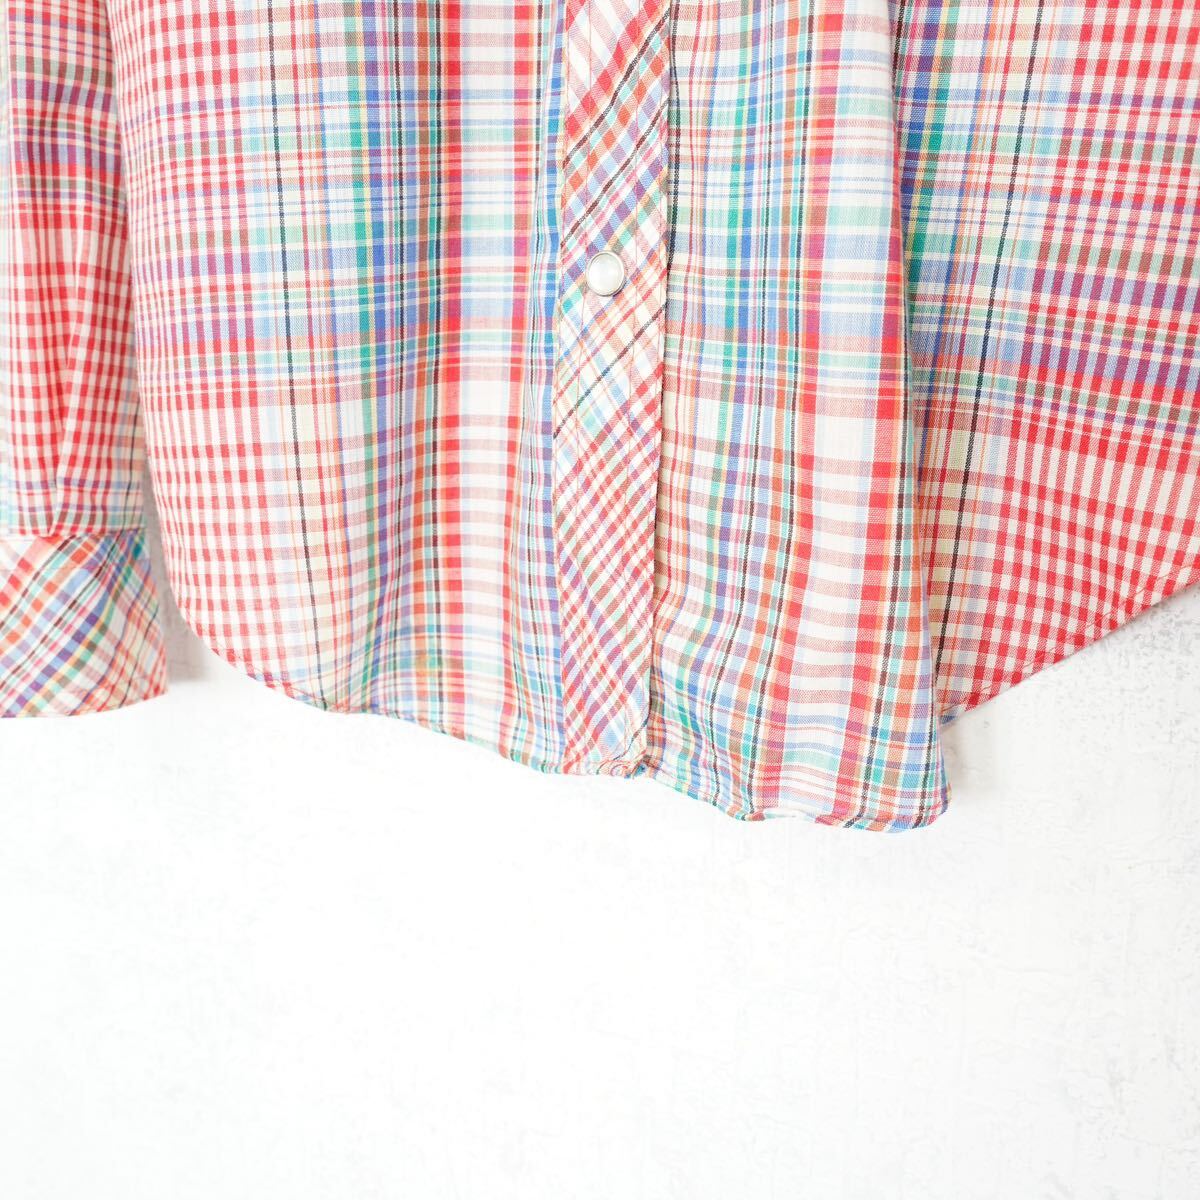 70's USA VINTAGE CHECK PATTERNED WESTERN SHIRT/70年代アメリカ古着チェック柄ウェスタンシャツ